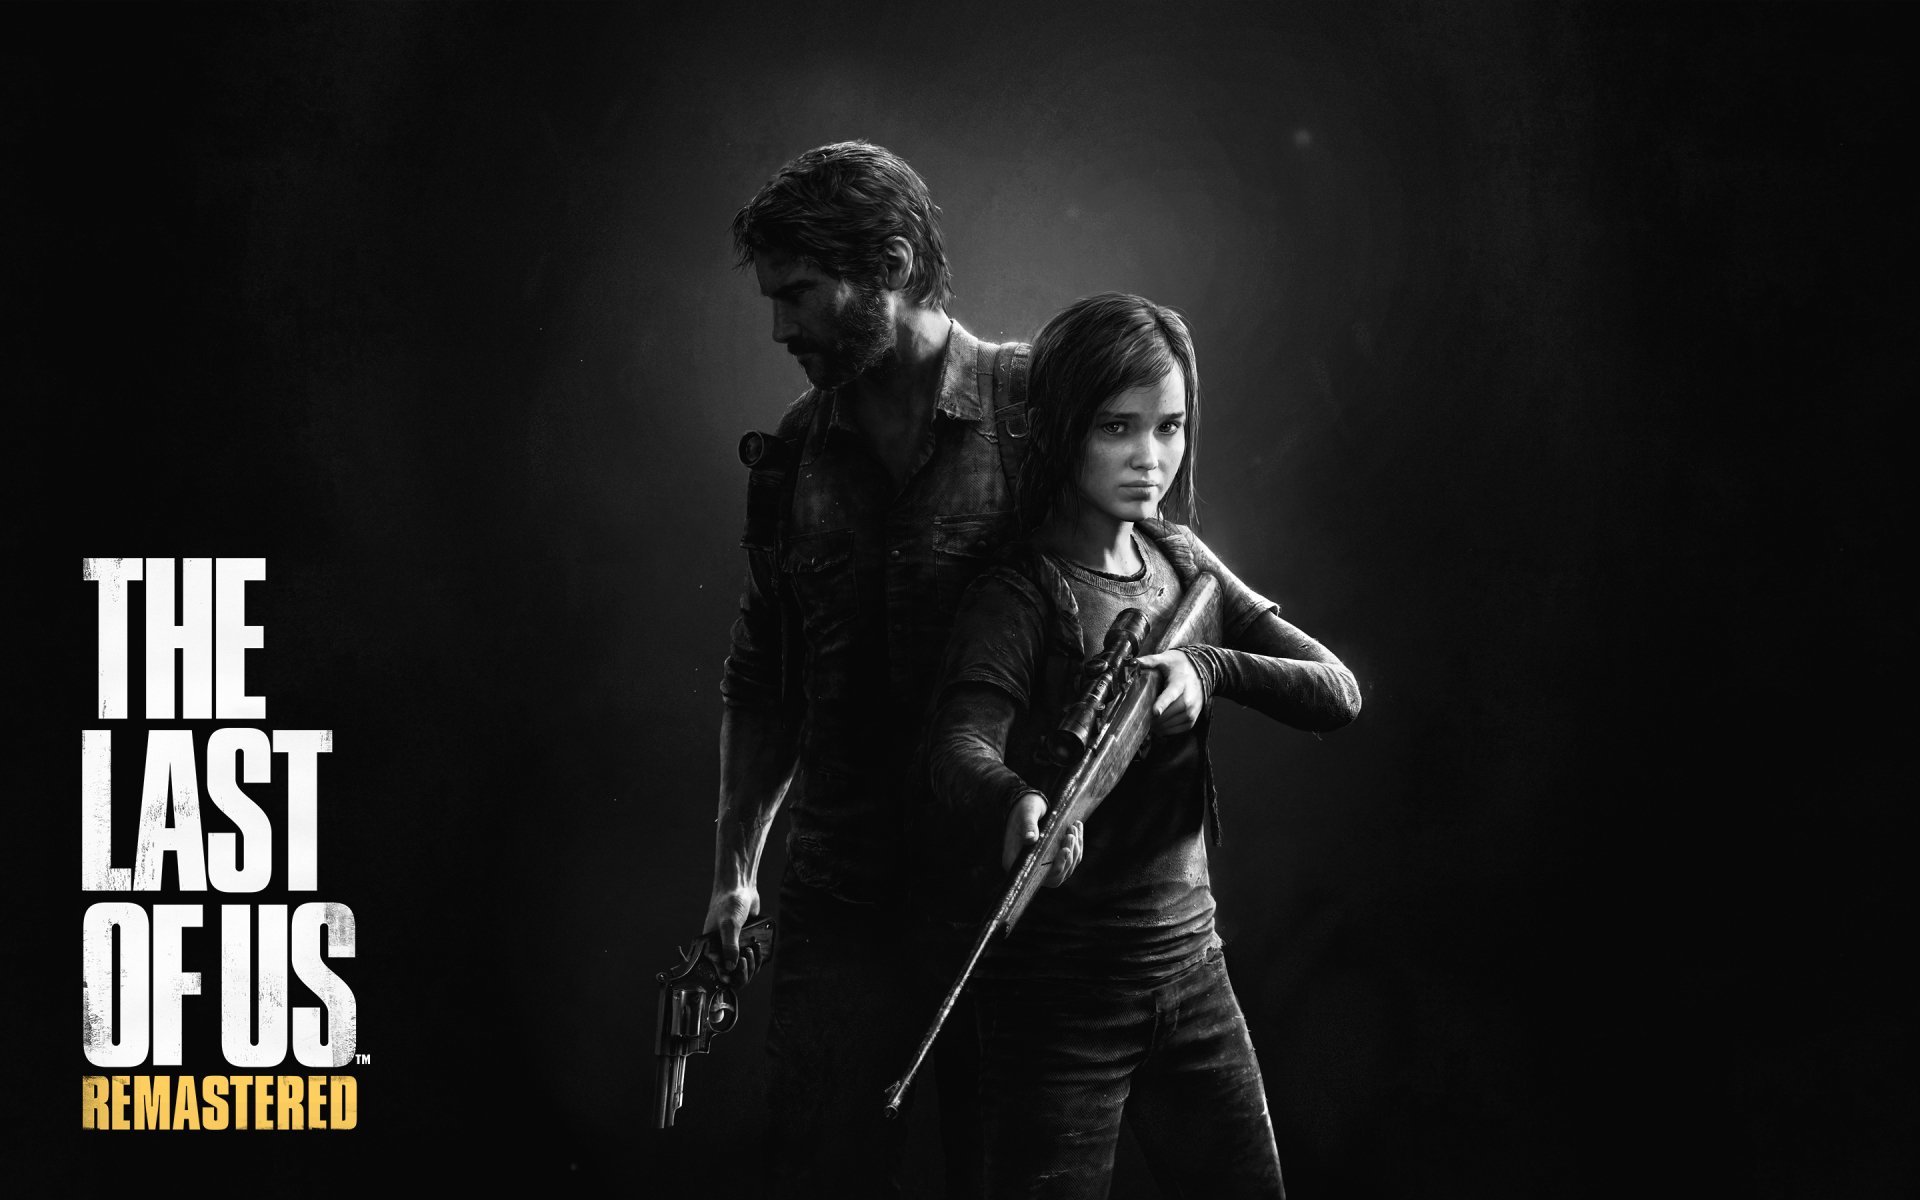 The Last Of Us Remastered - Naughty Dog